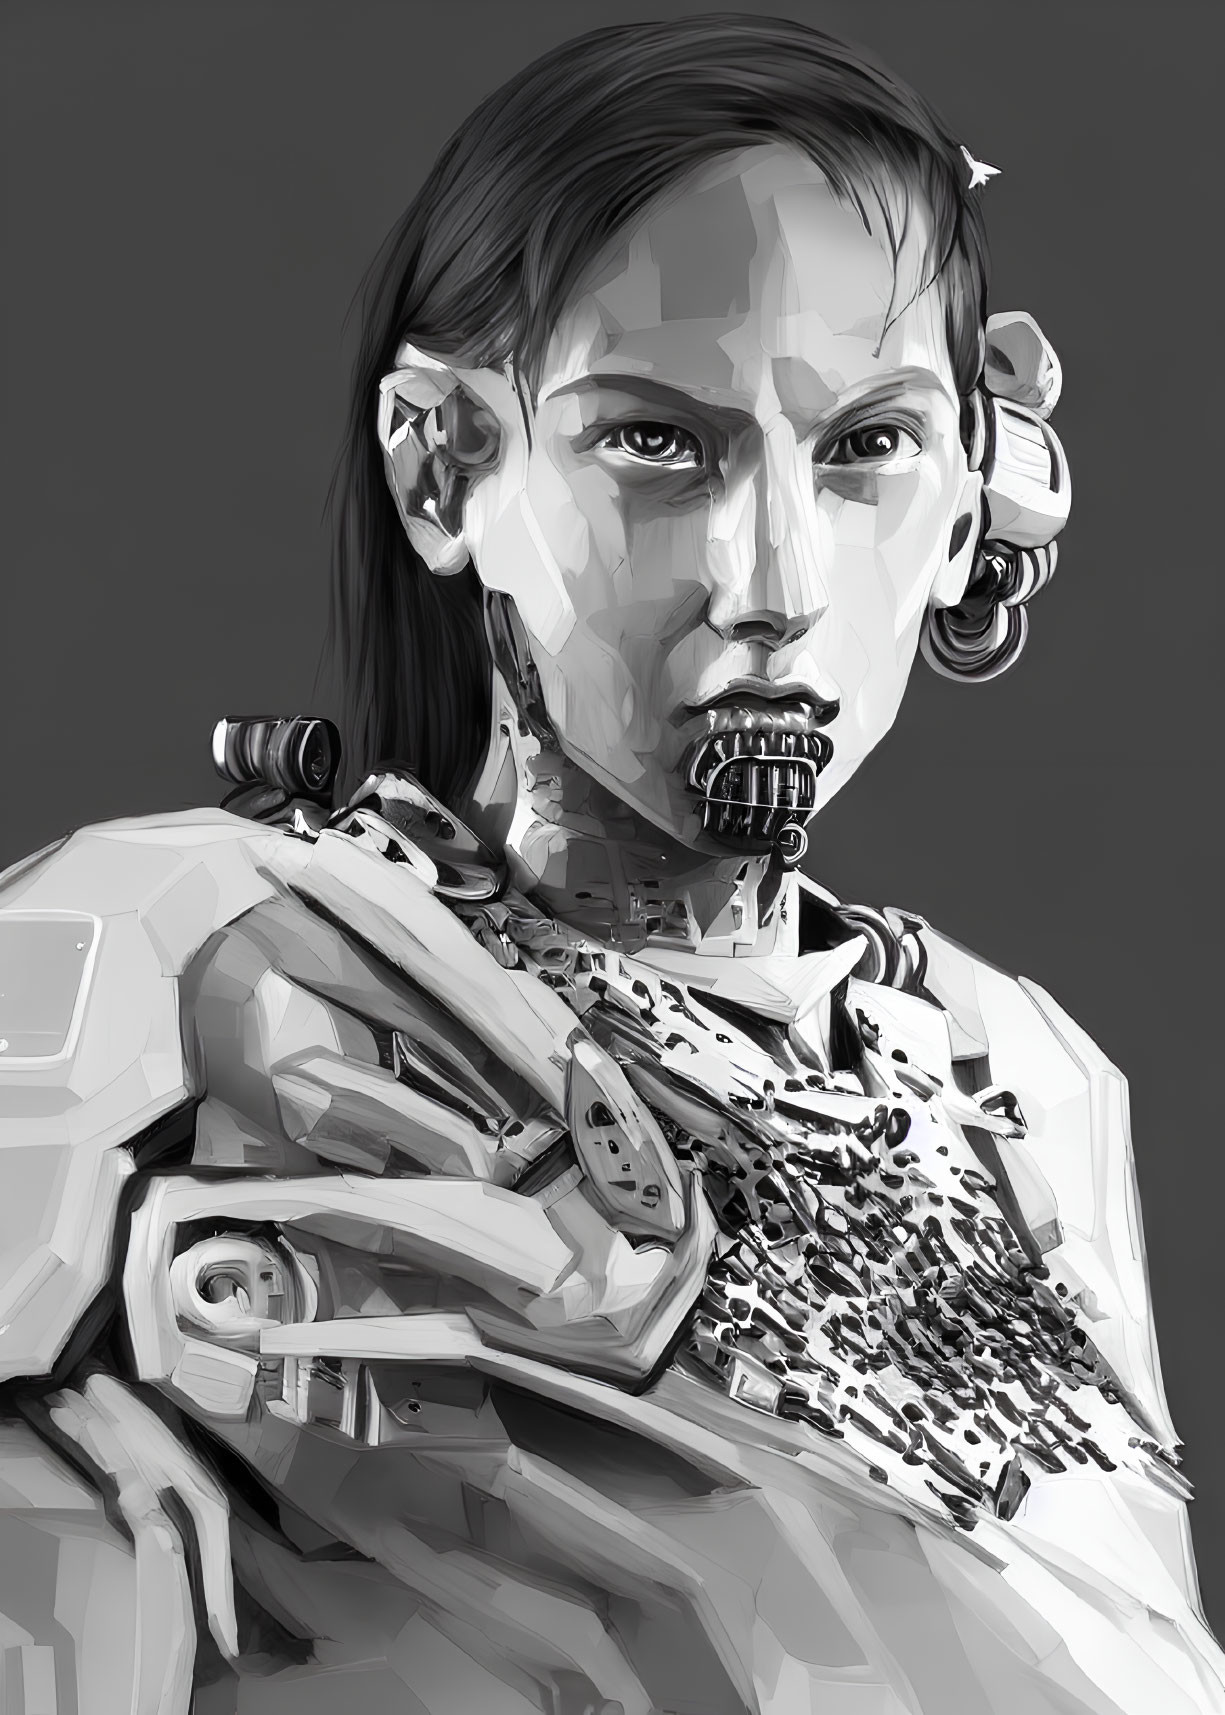 Grayscale digital art of person with cyborg features